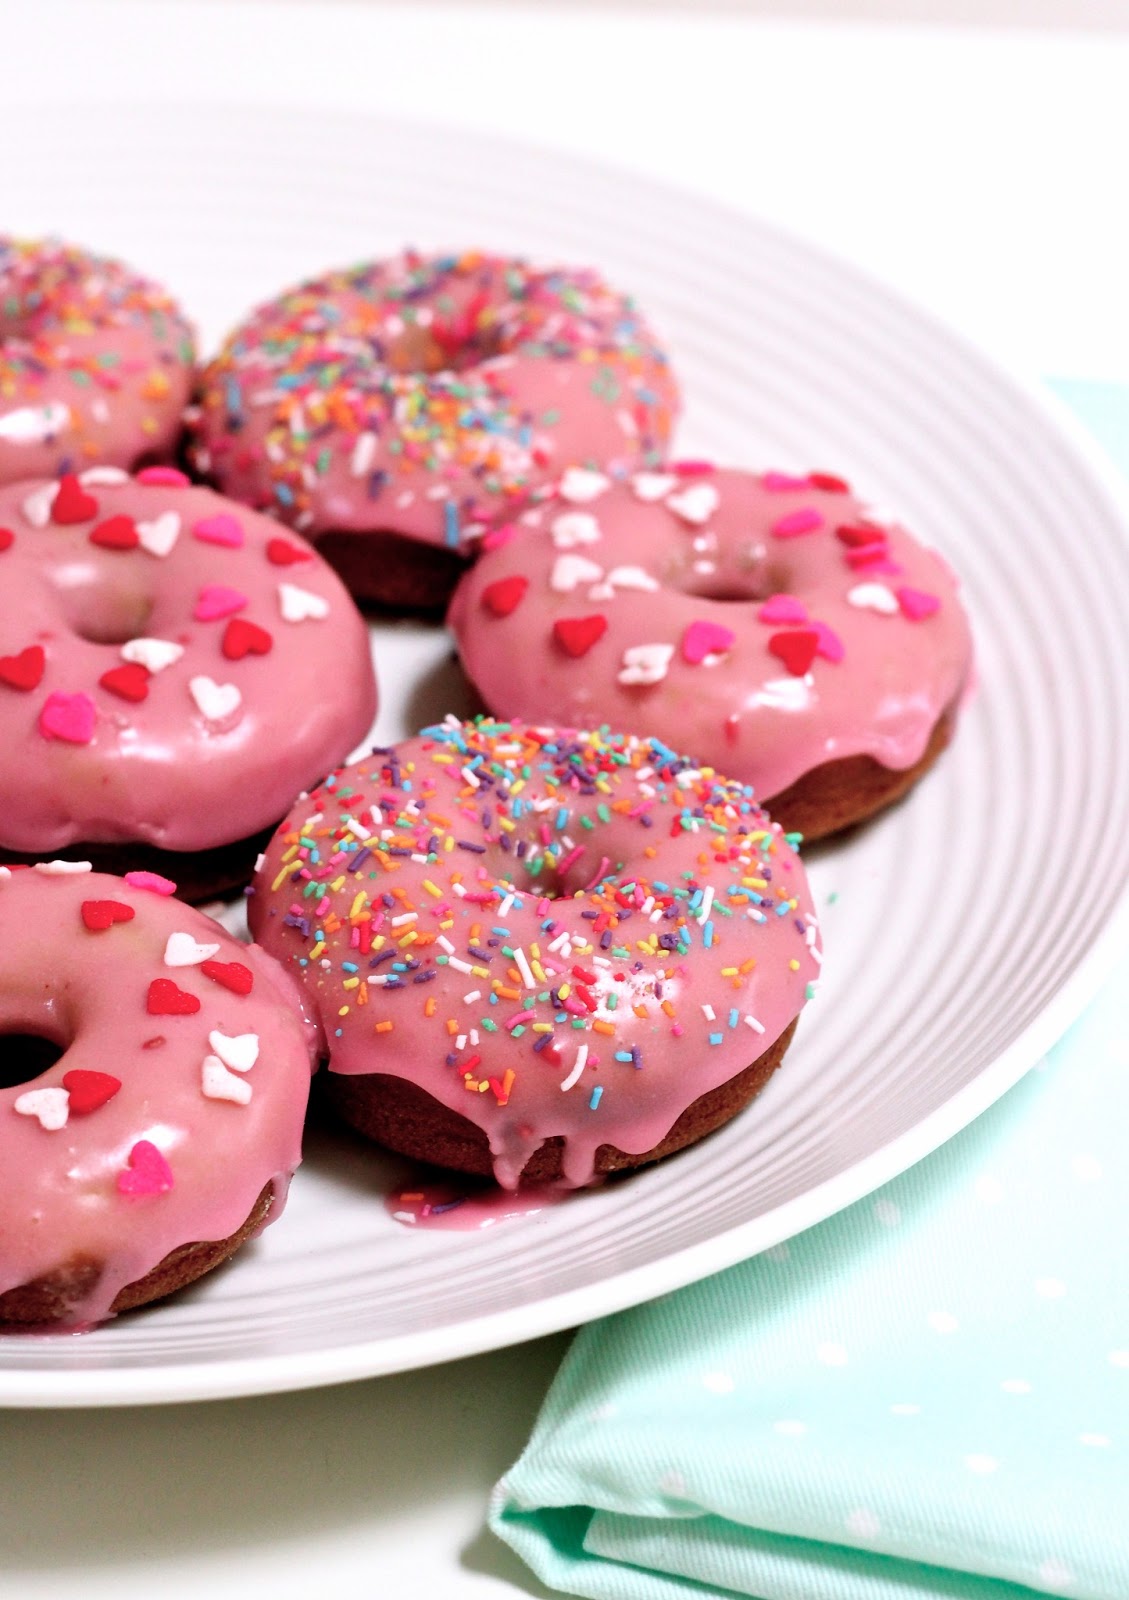 Baked Donuts Recipe No Yeast